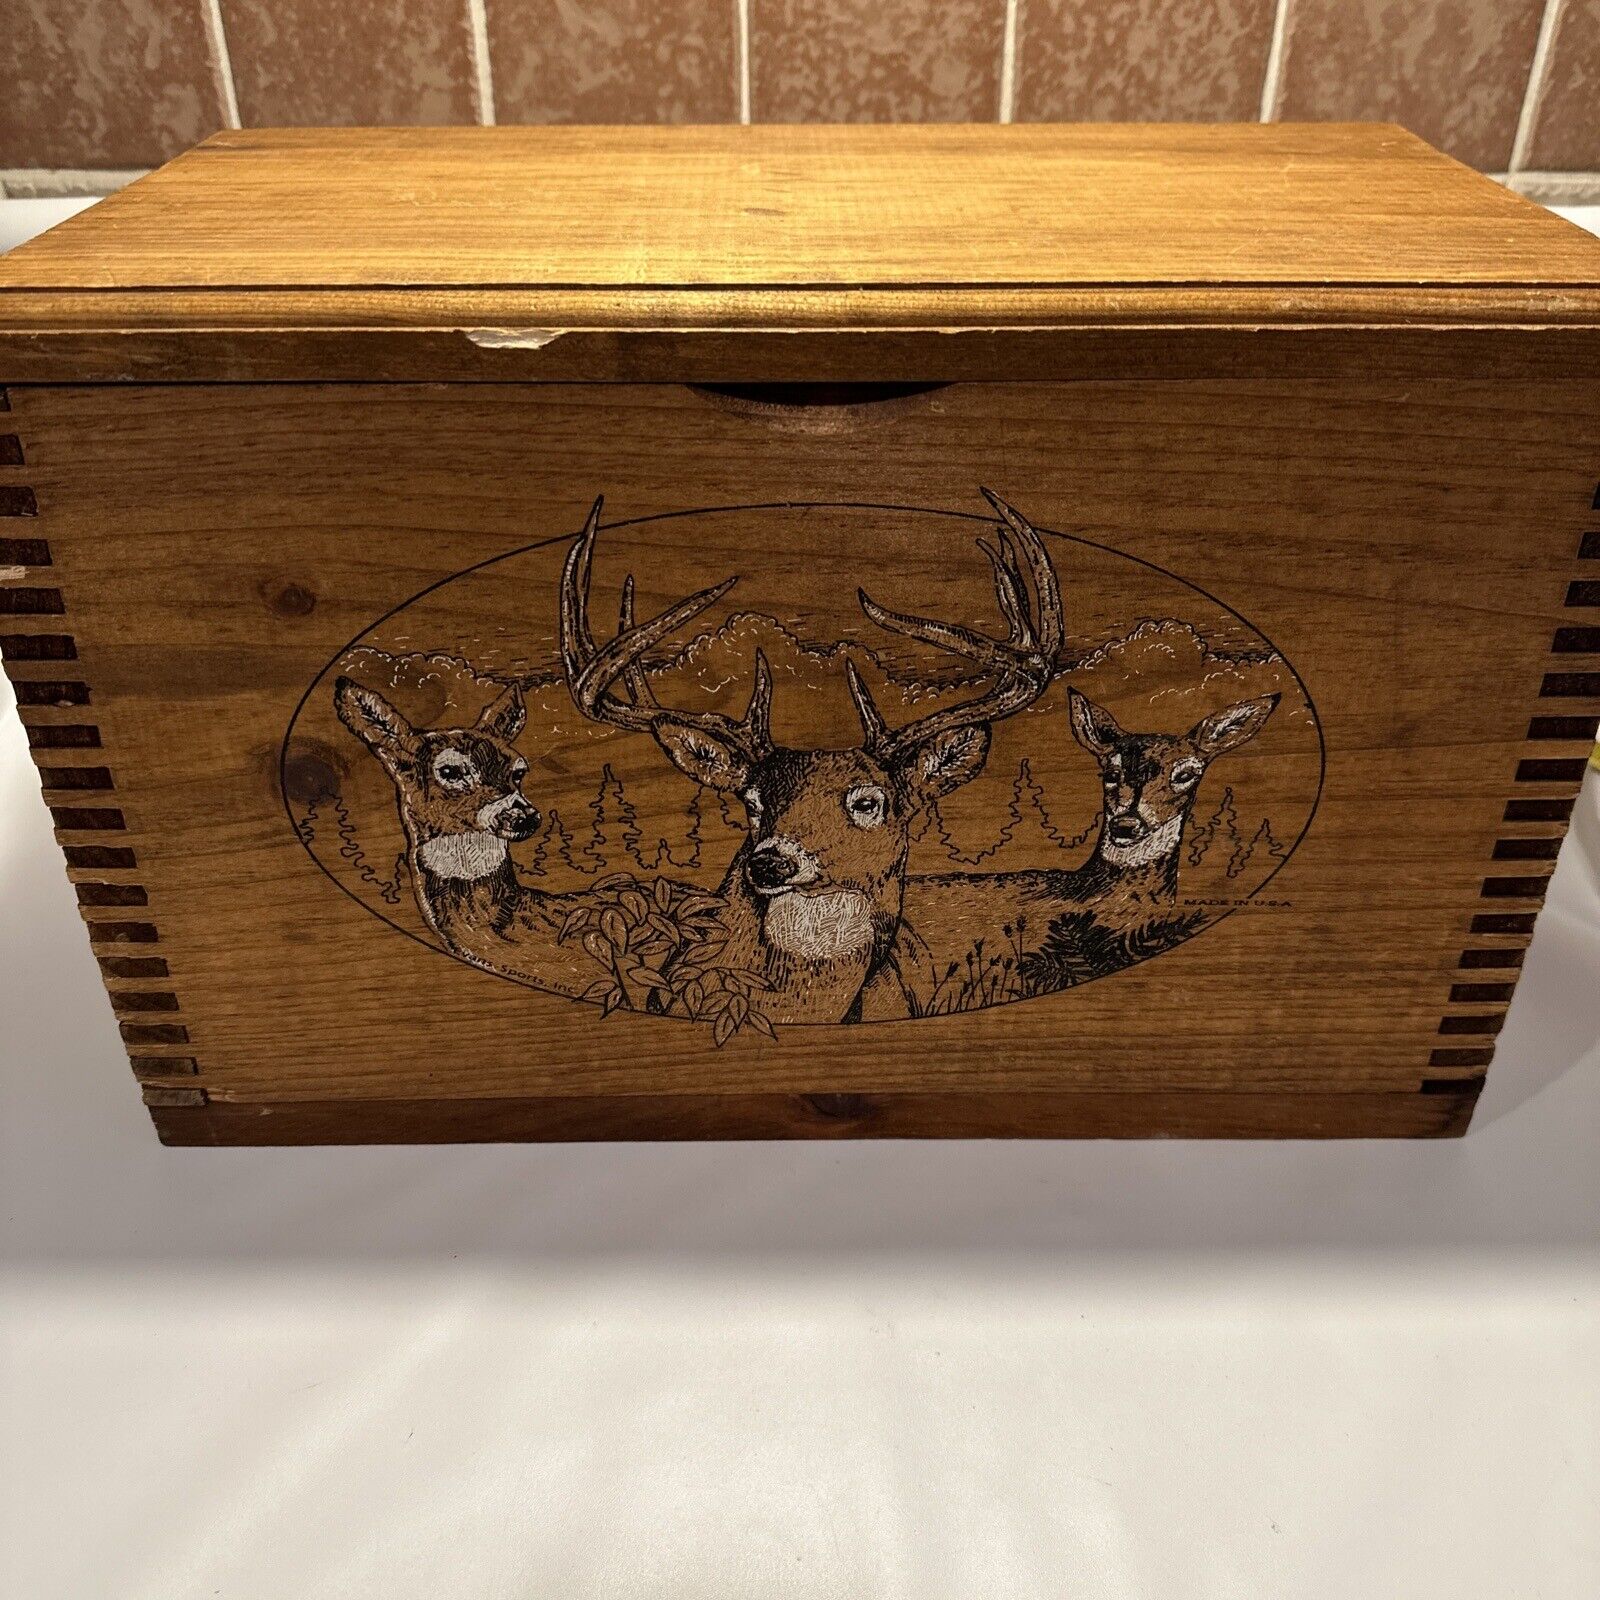 AMERICAN WILDLIFE Stag deer Buck Dovetailed Wood Box handcrafted by Evans Sports